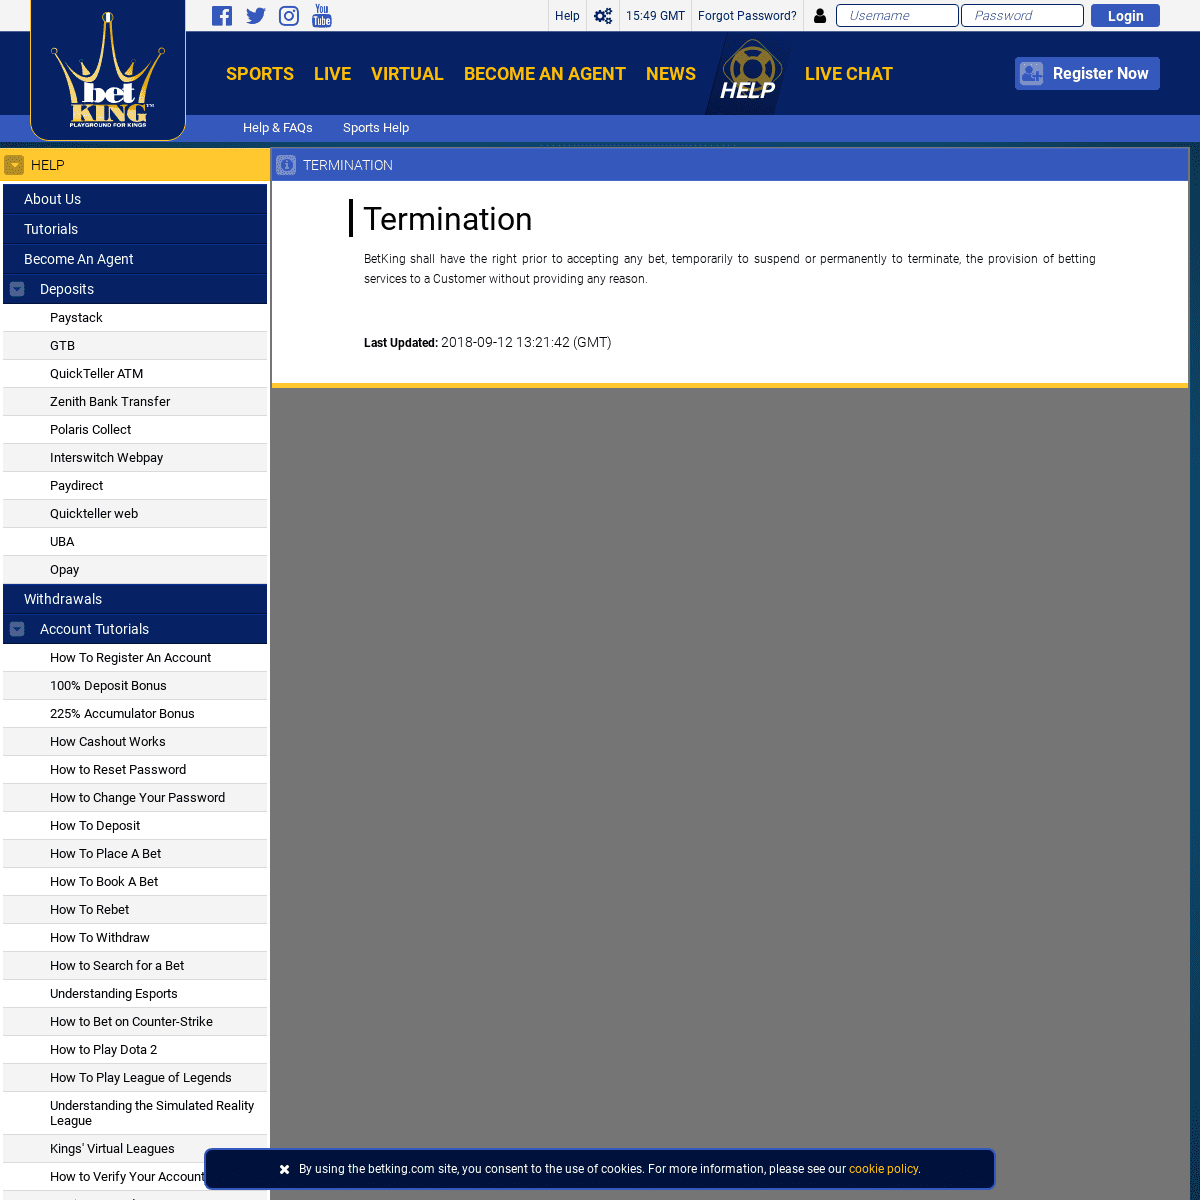 A complete backup of https://www.betking.com/help/general-help/terms-and-conditions/termination/